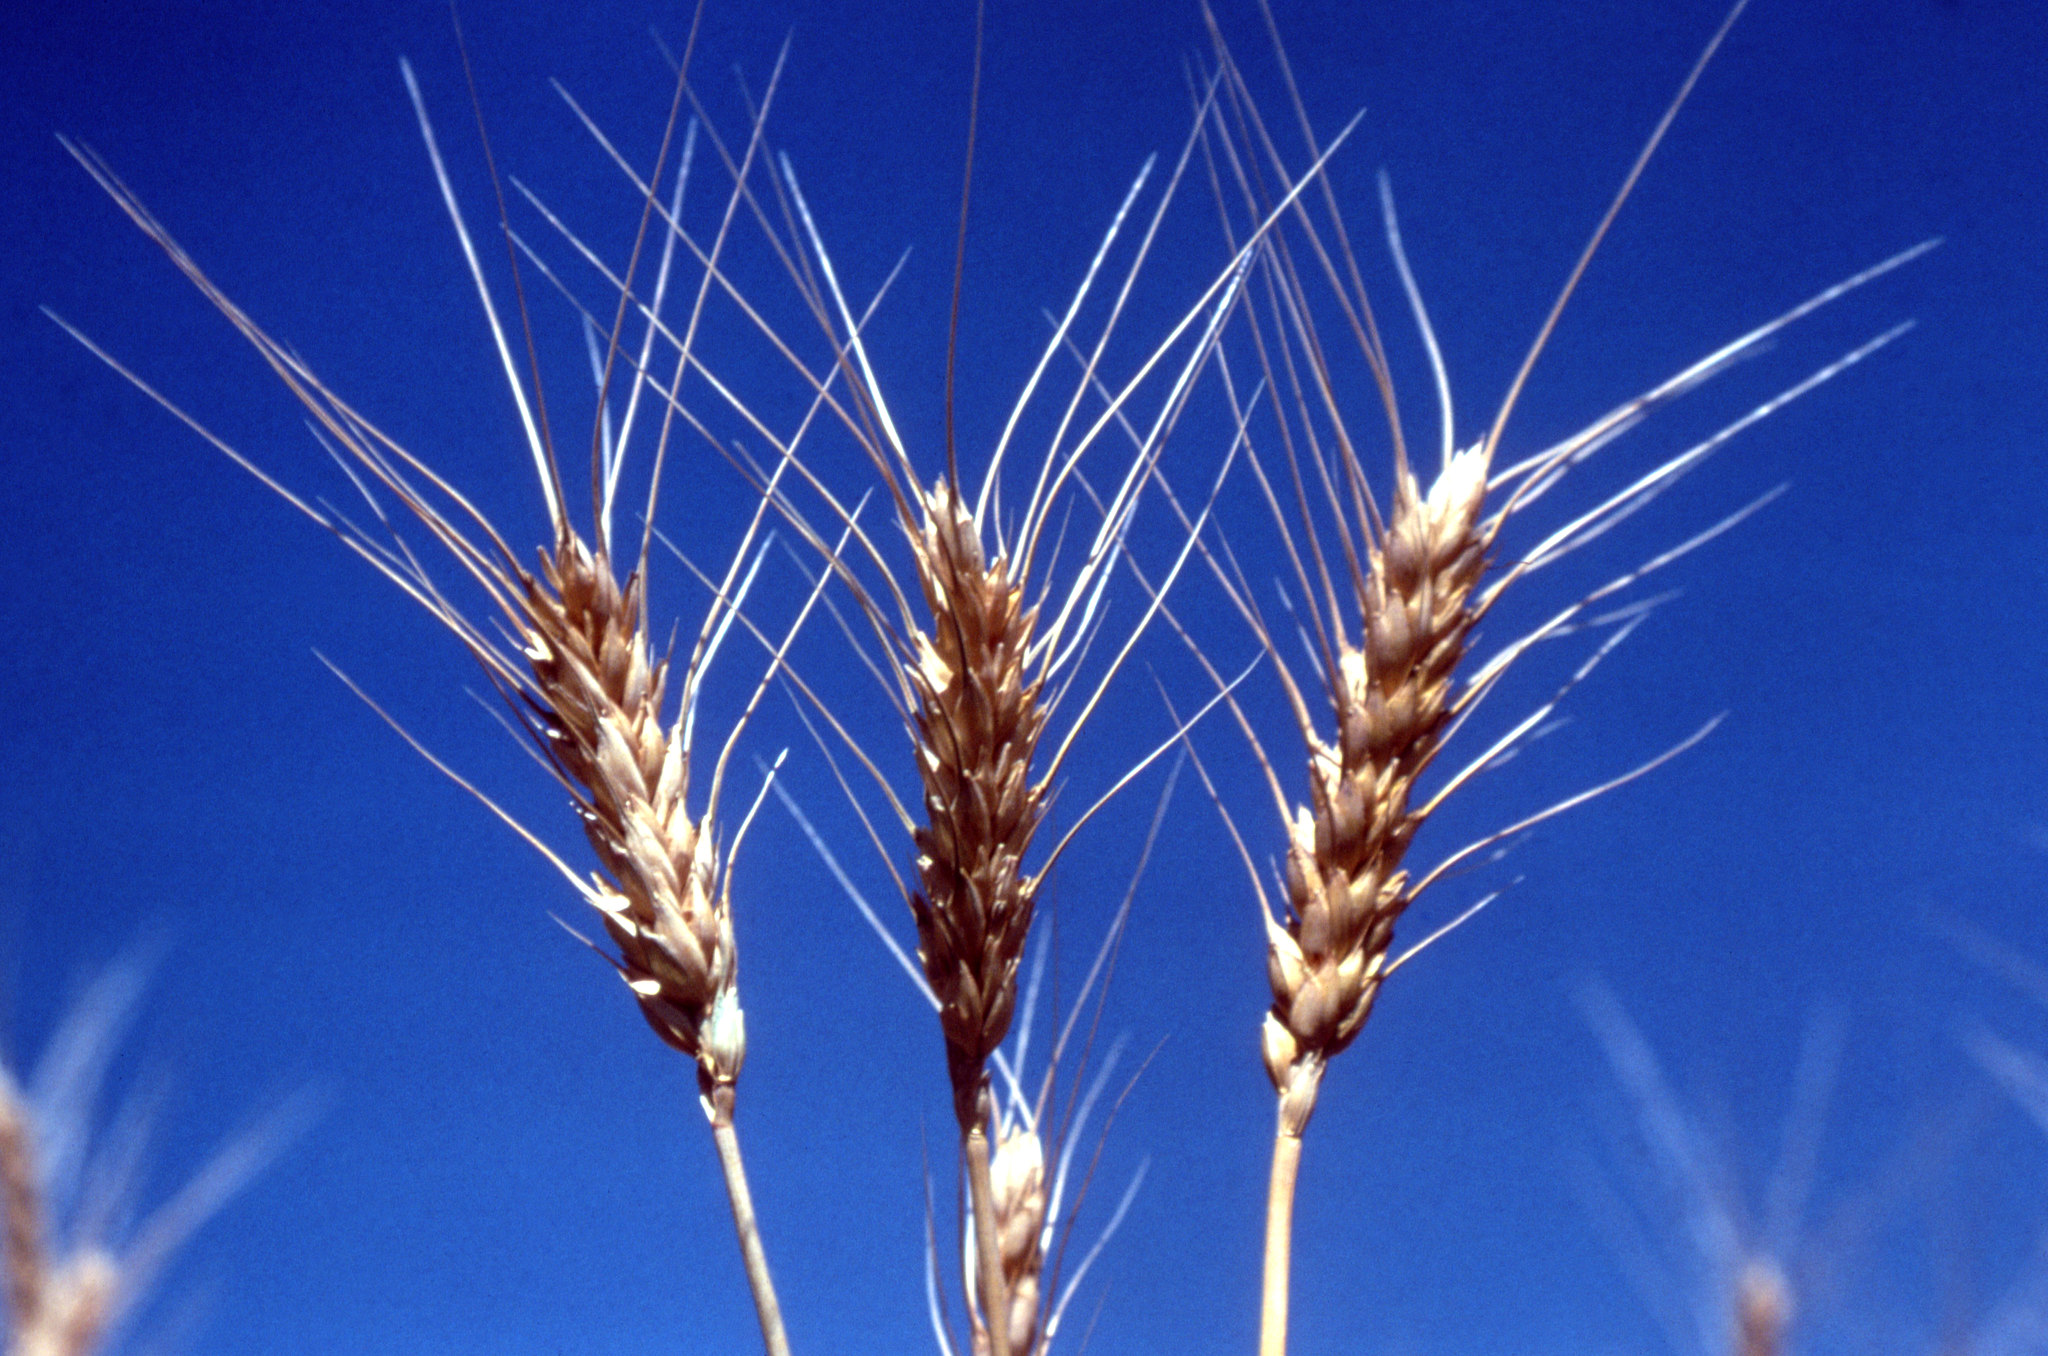 Stalks of wheat silhouetted against blue sky, July 1978.